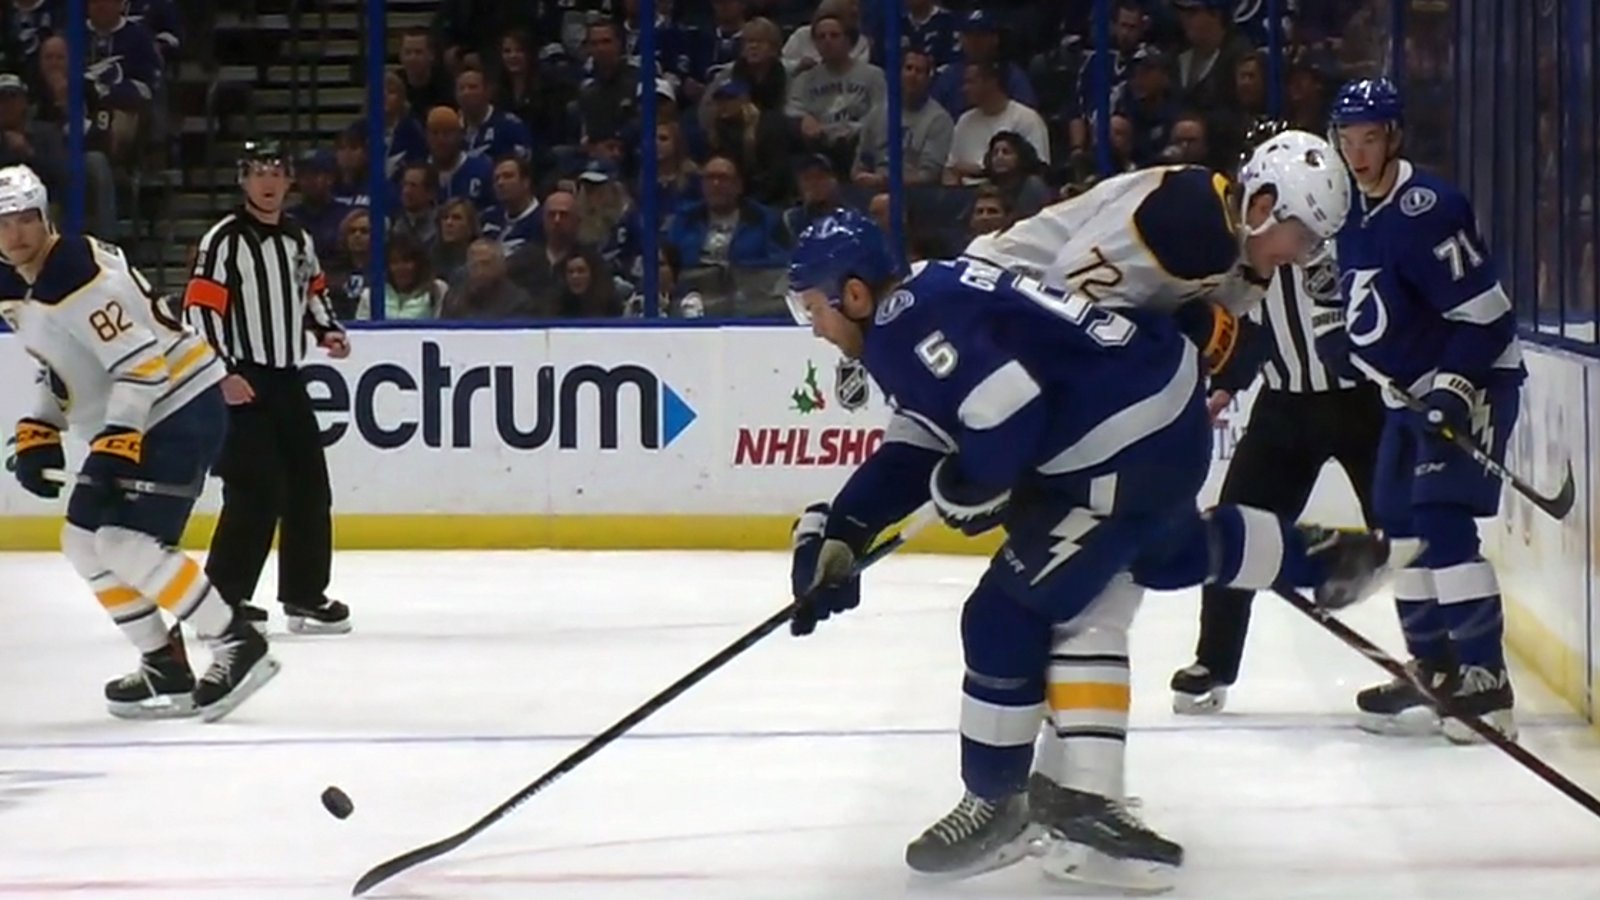 Sabres rookie Thompson takes out veteran Dan Girardi with a brutal knee on knee hit